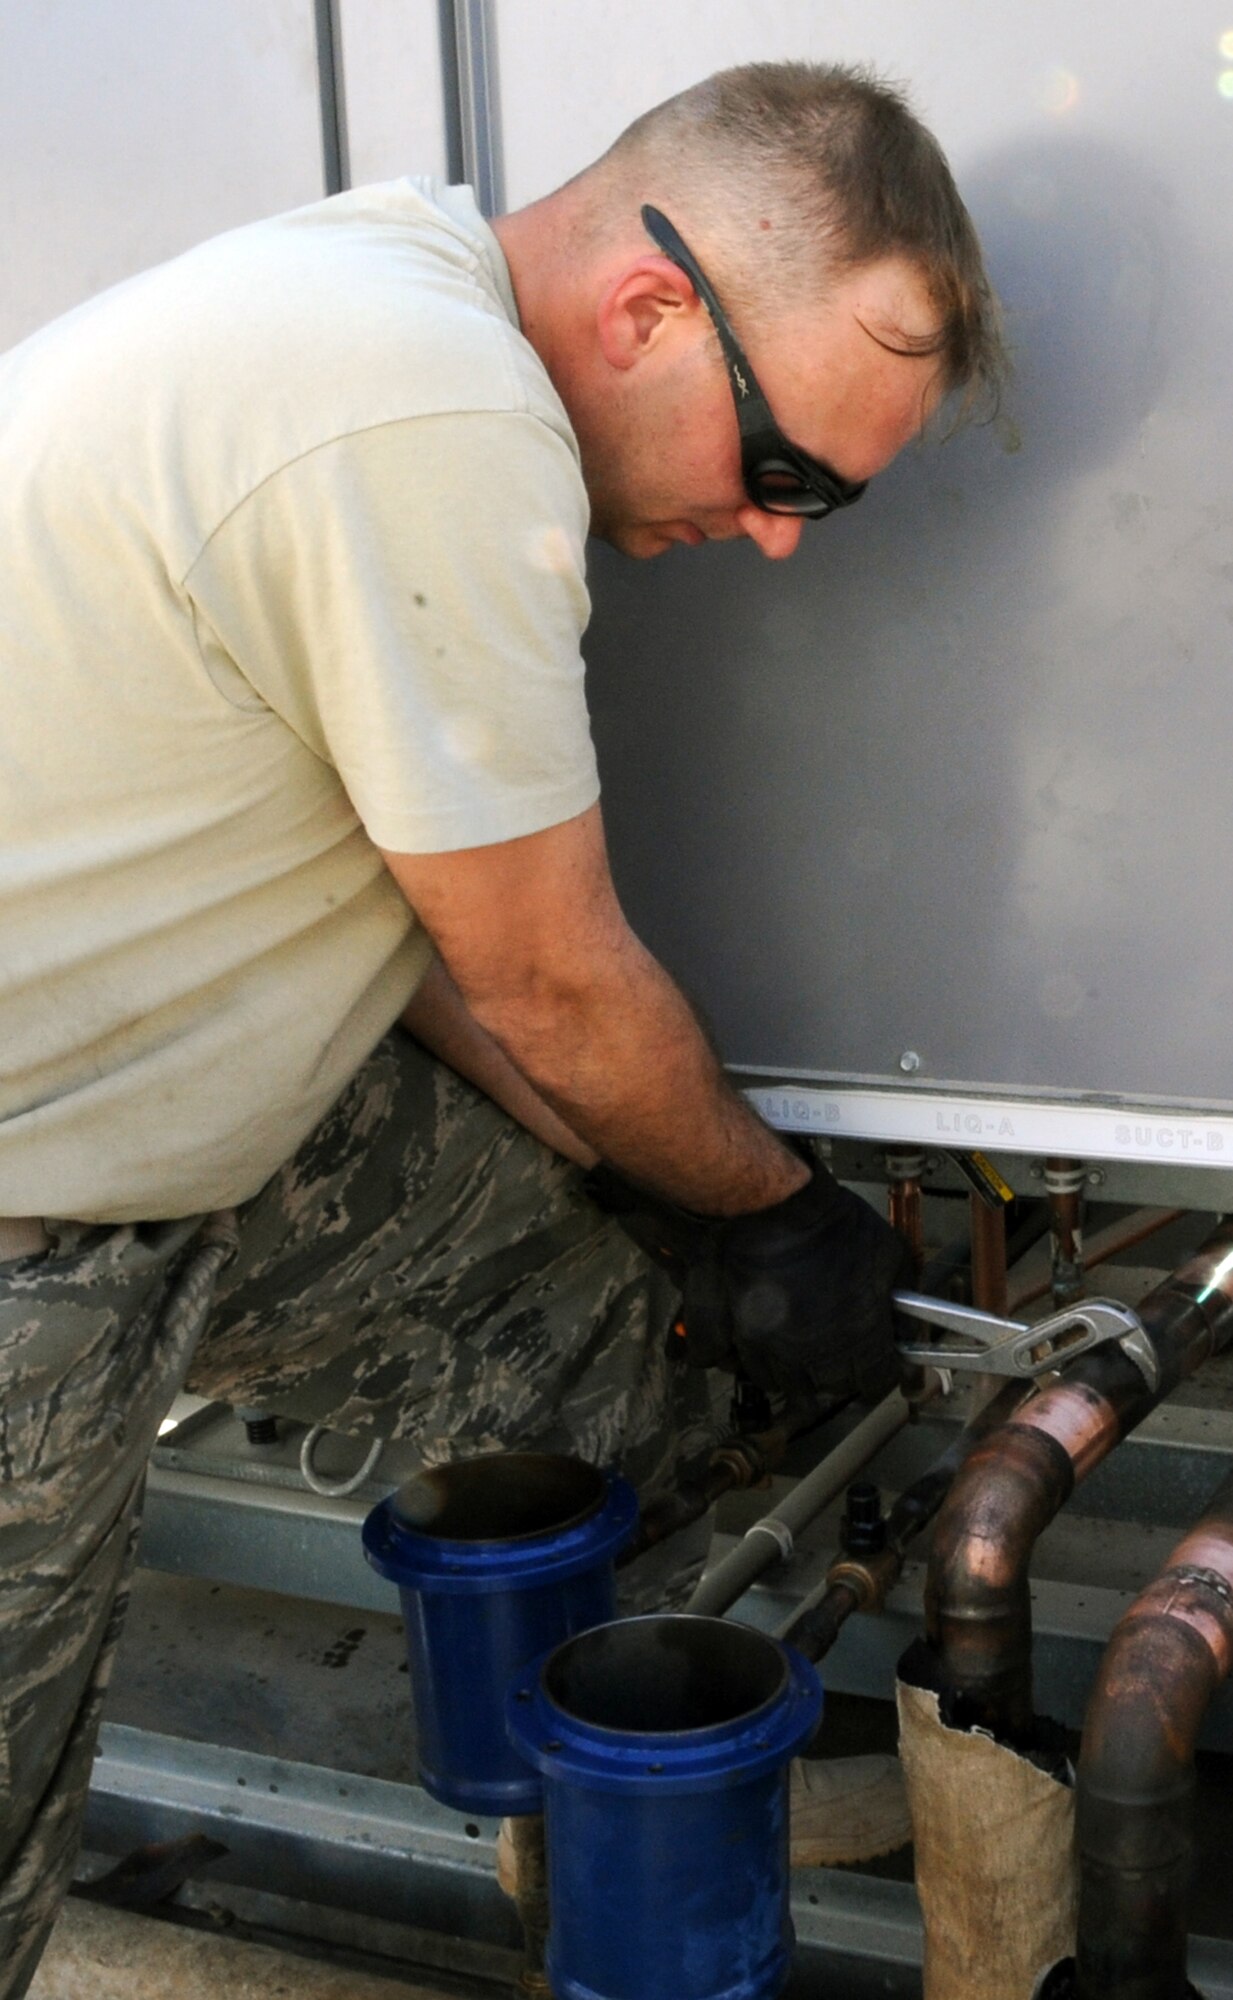 Staff Sgt. Christopher Varnes, a heating, ventilation, air conditioning and refrigeration craftsman with the 380th Expeditionary Civil Engineer Squadron, works on installing an air conditioner for the Oasis dining facility during operations for the 380th Air Expeditionary Wing at a non-disclosed base in Southwest Asia on Feb. 10, 2010. Sergeant Varnes is deployed from the 628th Civil Engineer Squadron at Joint Base Charleston, S.C., and his hometown areas are Charleston and Virginia Beach, Va. (U.S. Air Force Photo/Senior Airman Jenifer H. Calhoun/Released)